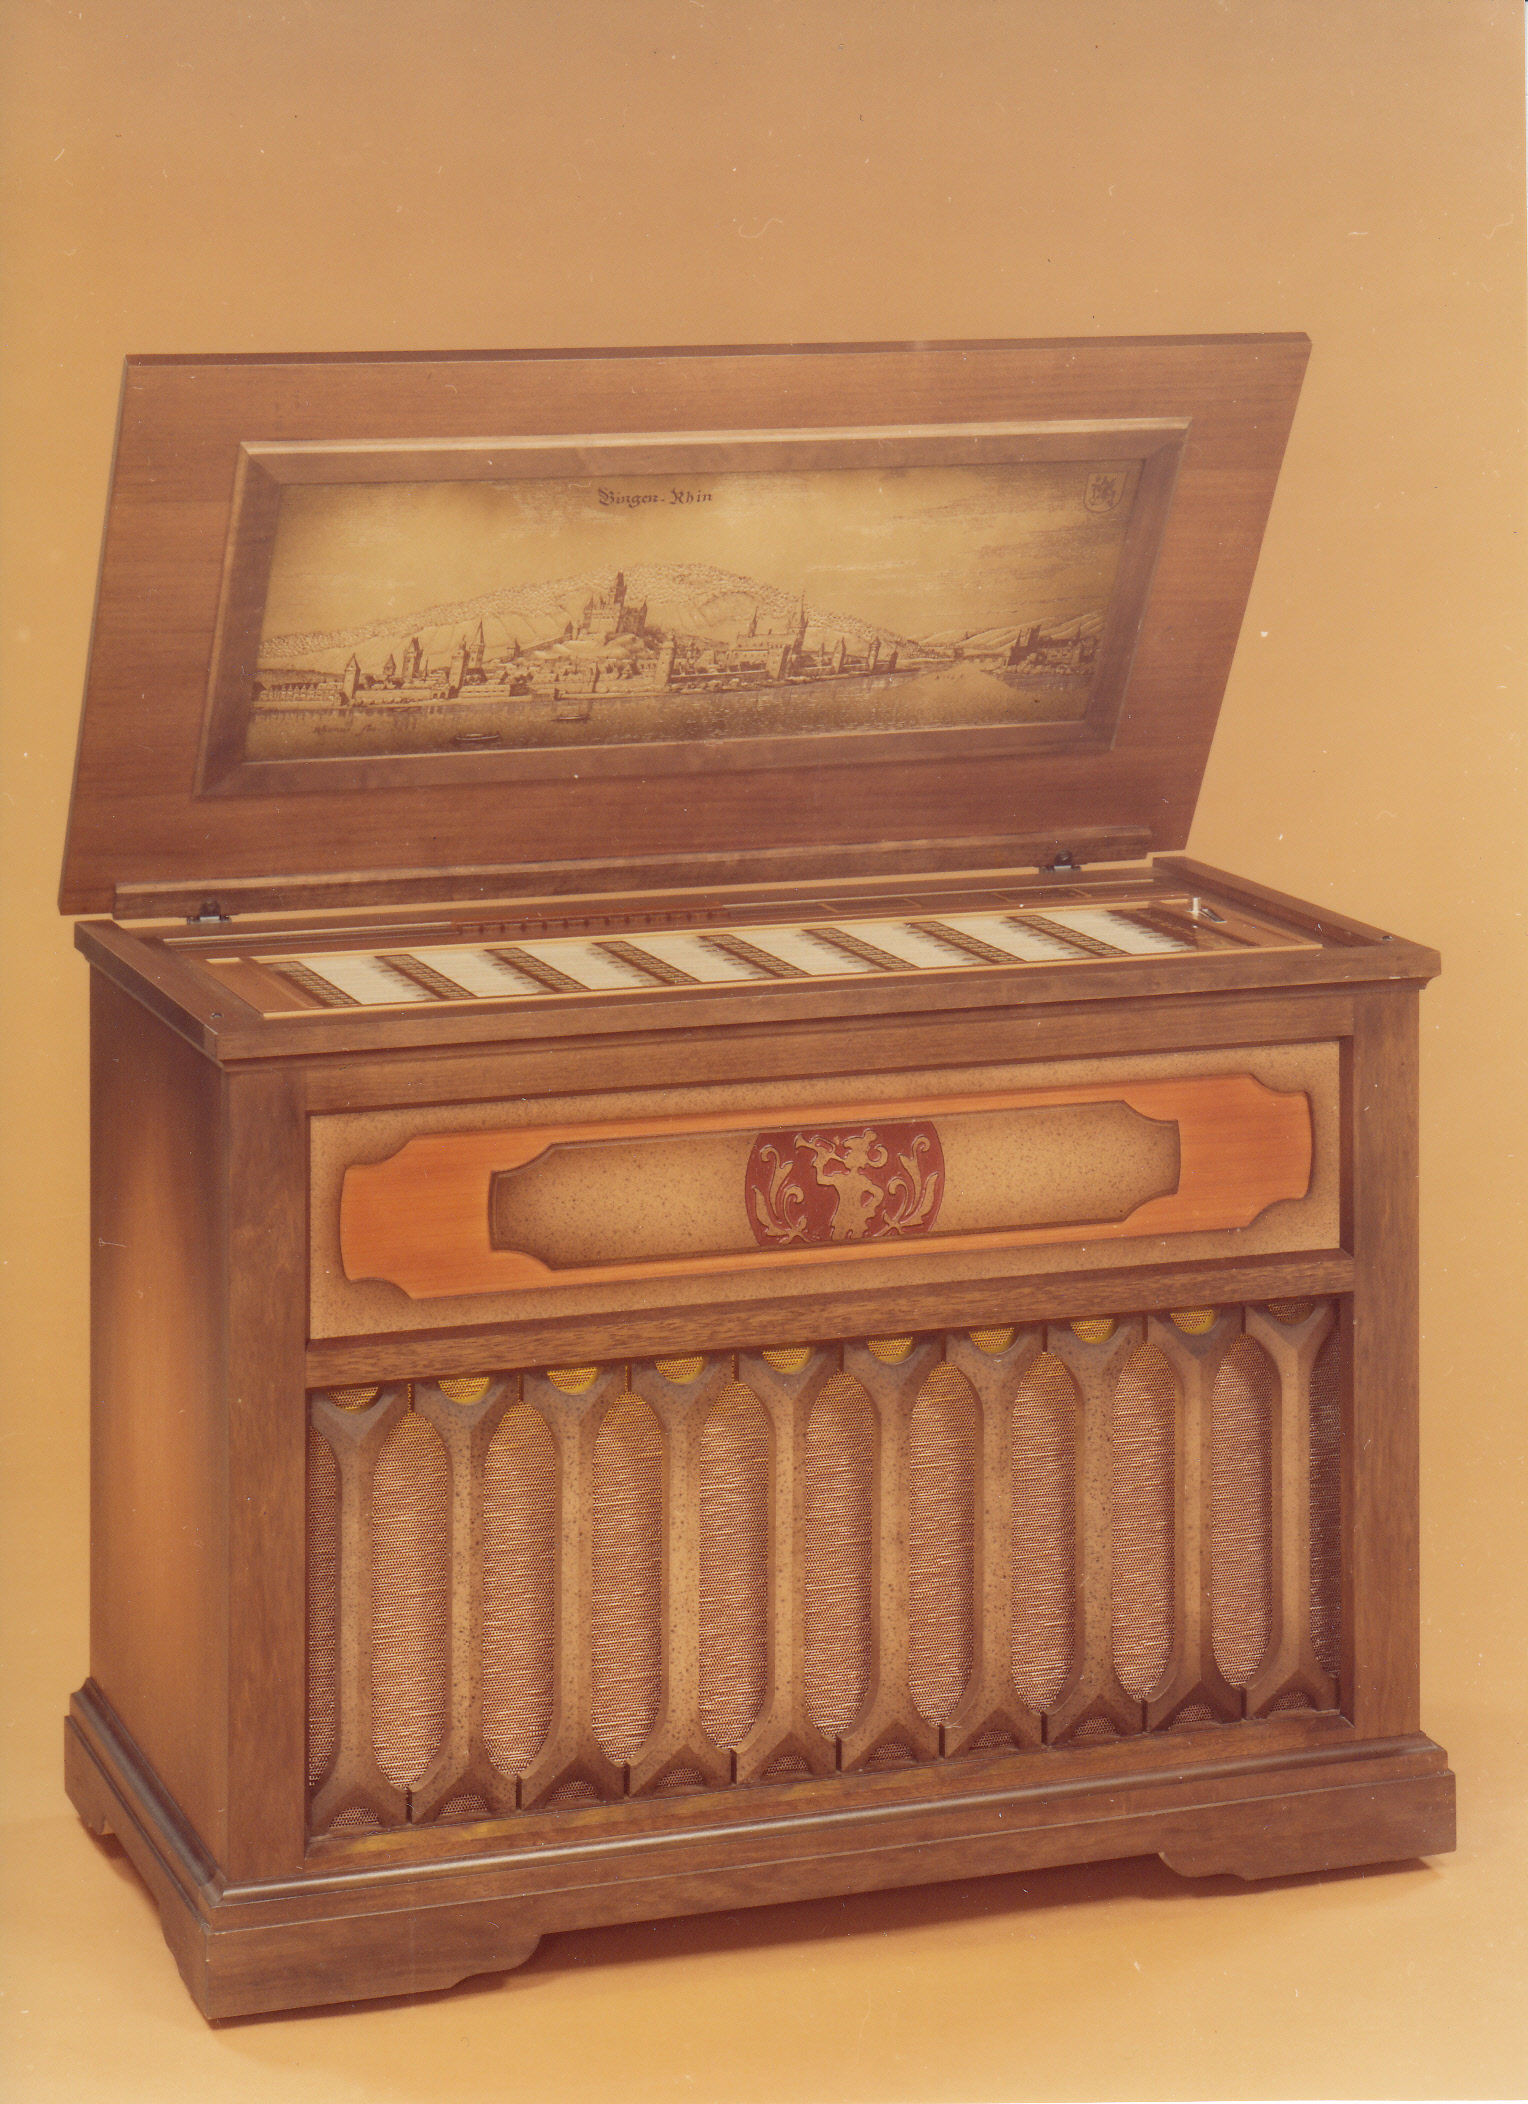 pure wooden classic jukebox